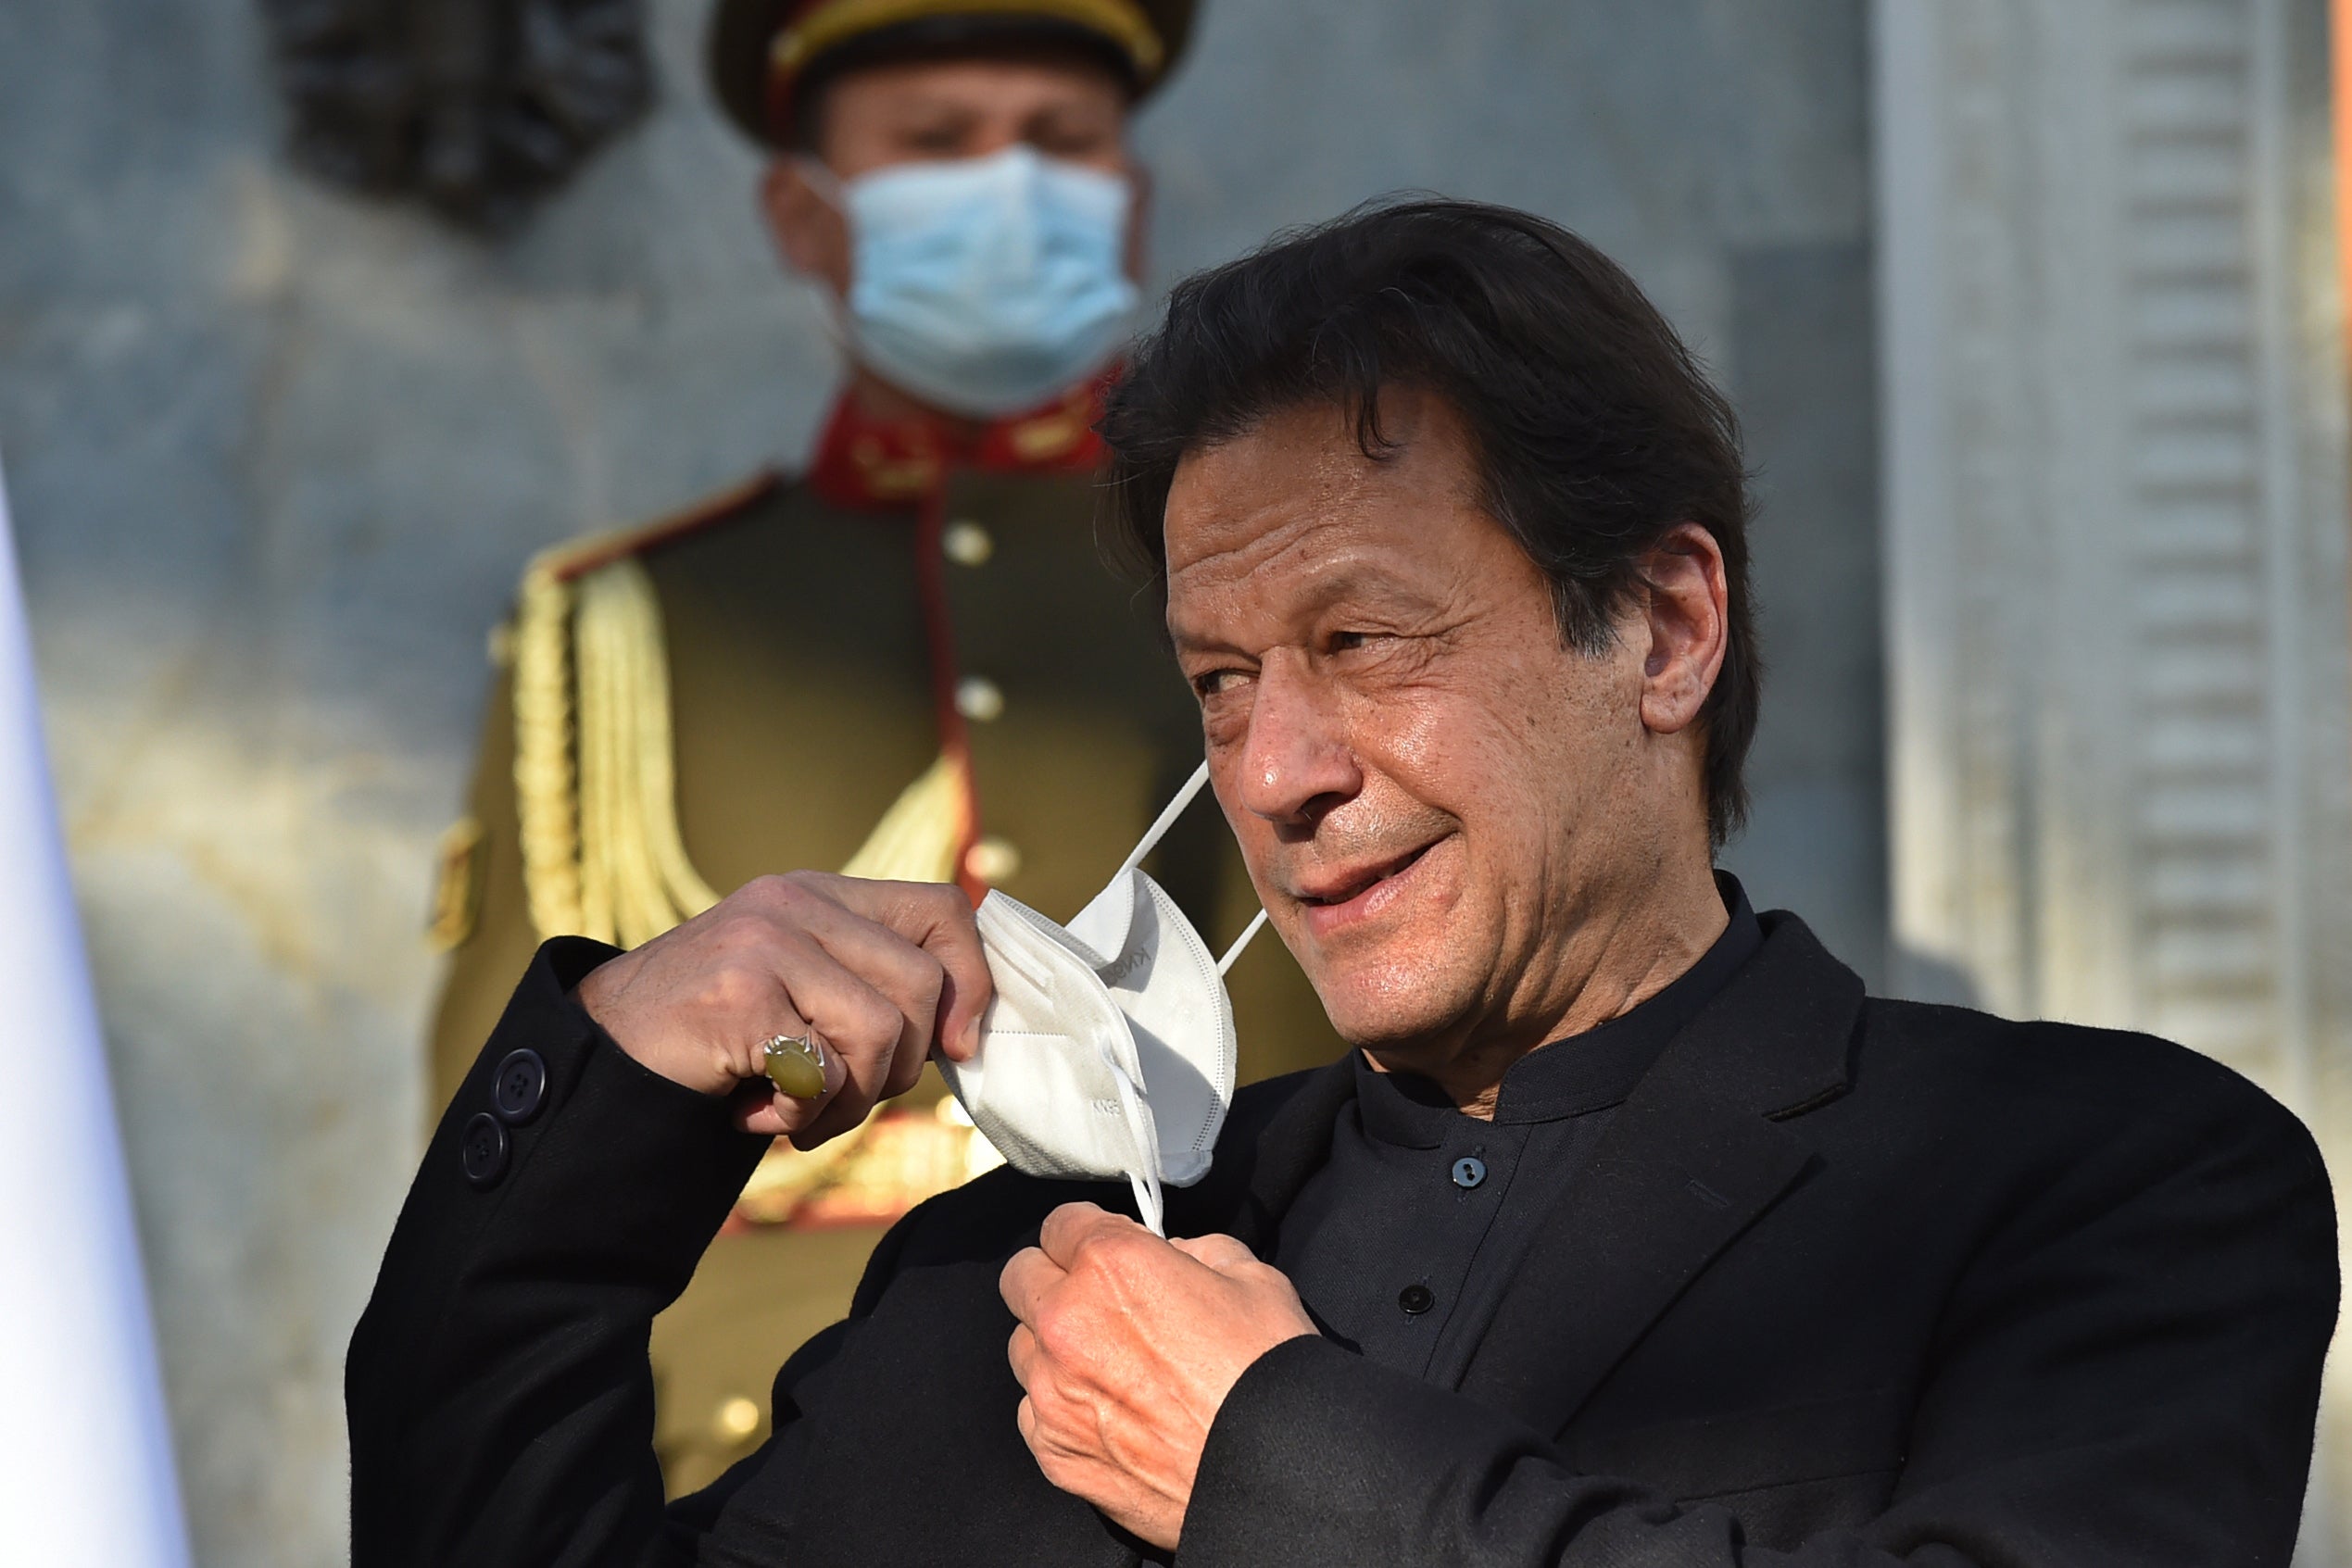 Imran Khan has been frequently alleging that Narendra Modi government could carry out ‘false flag’ operations in Islamabad for political gains